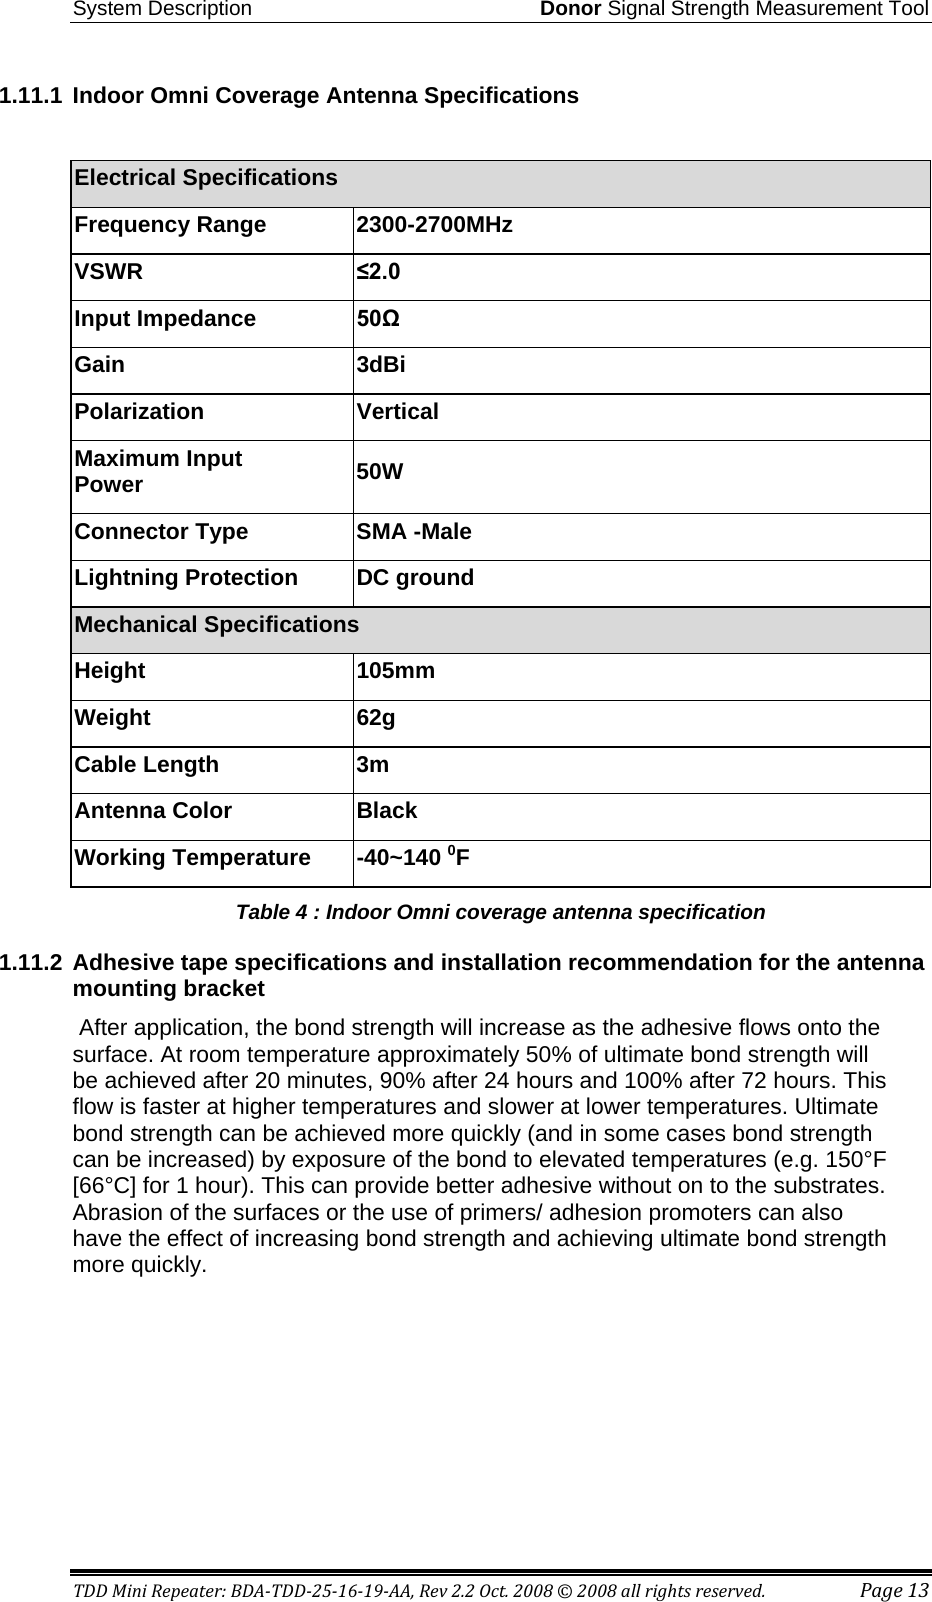 System Description Donor Signal Strength Measurement Tool TDD Mini Repeater: BDA-TDD-25-16-19-AA, Rev 2.2 Oct. 2008 © 2008 all rights reserved. Page 13 1.11.1 Indoor Omni Coverage Antenna Specifications   Electrical Specifications Frequency Range 2300-2700MHz VSWR ≤2.0 Input Impedance 50Ω Gain 3dBi Polarization Vertical  Maximum Input Power 50W Connector Type SMA -Male  Lightning Protection DC ground  Mechanical Specifications Height 105mm Weight 62g Cable Length 3m Antenna Color Black Working Temperature  -40~140 0F  Table 4 : Indoor Omni coverage antenna specification  1.11.2 Adhesive tape specifications and installation recommendation for the antenna mounting bracket  After application, the bond strength will increase as the adhesive flows onto the surface. At room temperature approximately 50% of ultimate bond strength will be achieved after 20 minutes, 90% after 24 hours and 100% after 72 hours. This flow is faster at higher temperatures and slower at lower temperatures. Ultimate bond strength can be achieved more quickly (and in some cases bond strength can be increased) by exposure of the bond to elevated temperatures (e.g. 150°F [66°C] for 1 hour). This can provide better adhesive without on to the substrates. Abrasion of the surfaces or the use of primers/ adhesion promoters can also have the effect of increasing bond strength and achieving ultimate bond strength more quickly.   